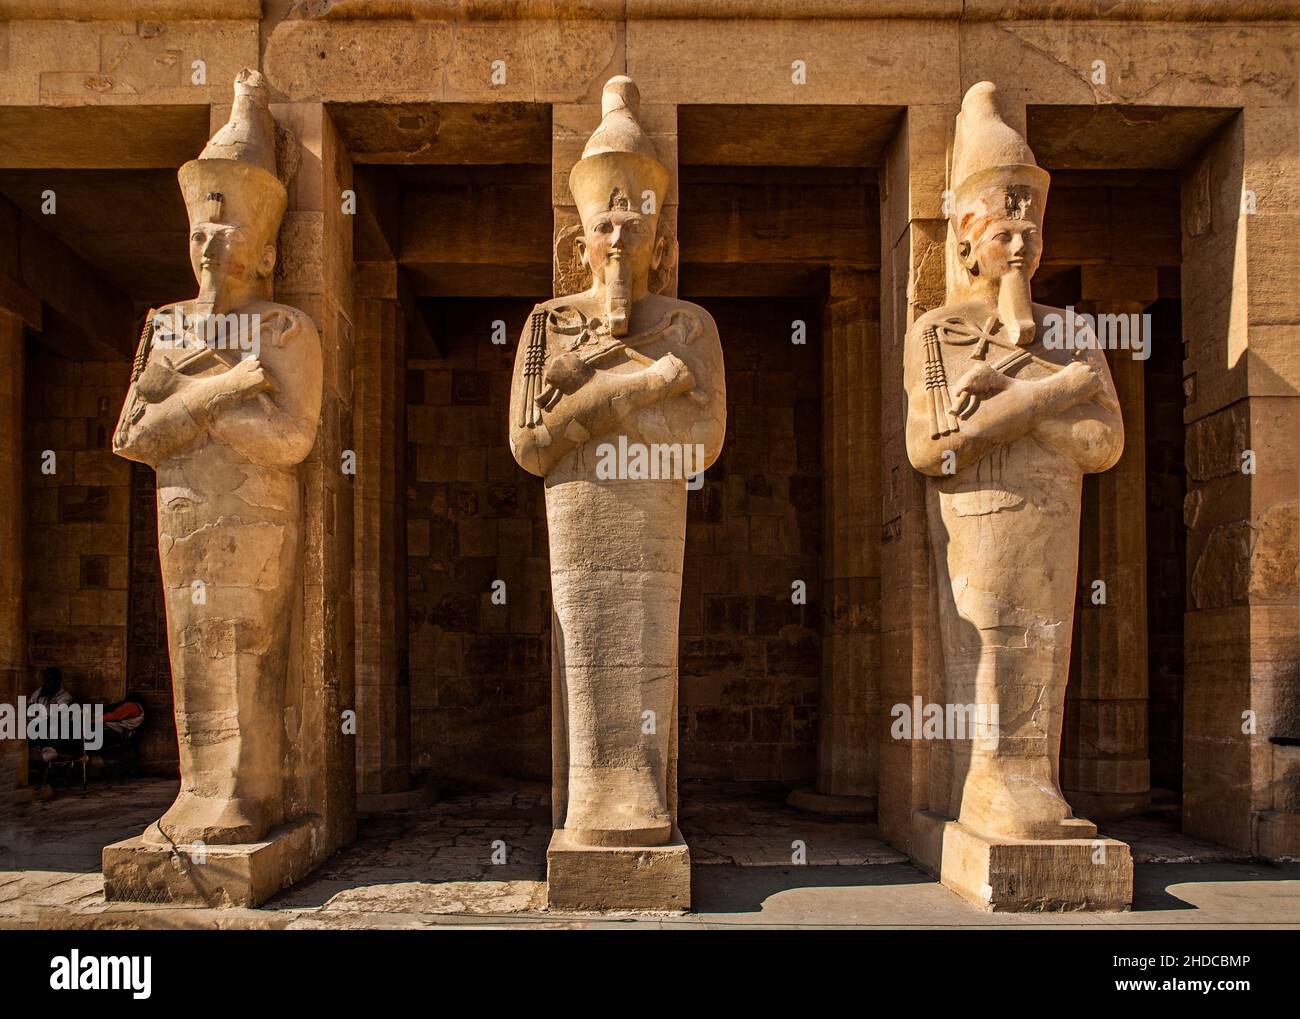 Hatshepsut's larger-than-life (5 m) statues of Osiris in the central colonnade, statues in the robes of the god Osiris, funerary temple of the pharaoh Stock Photo